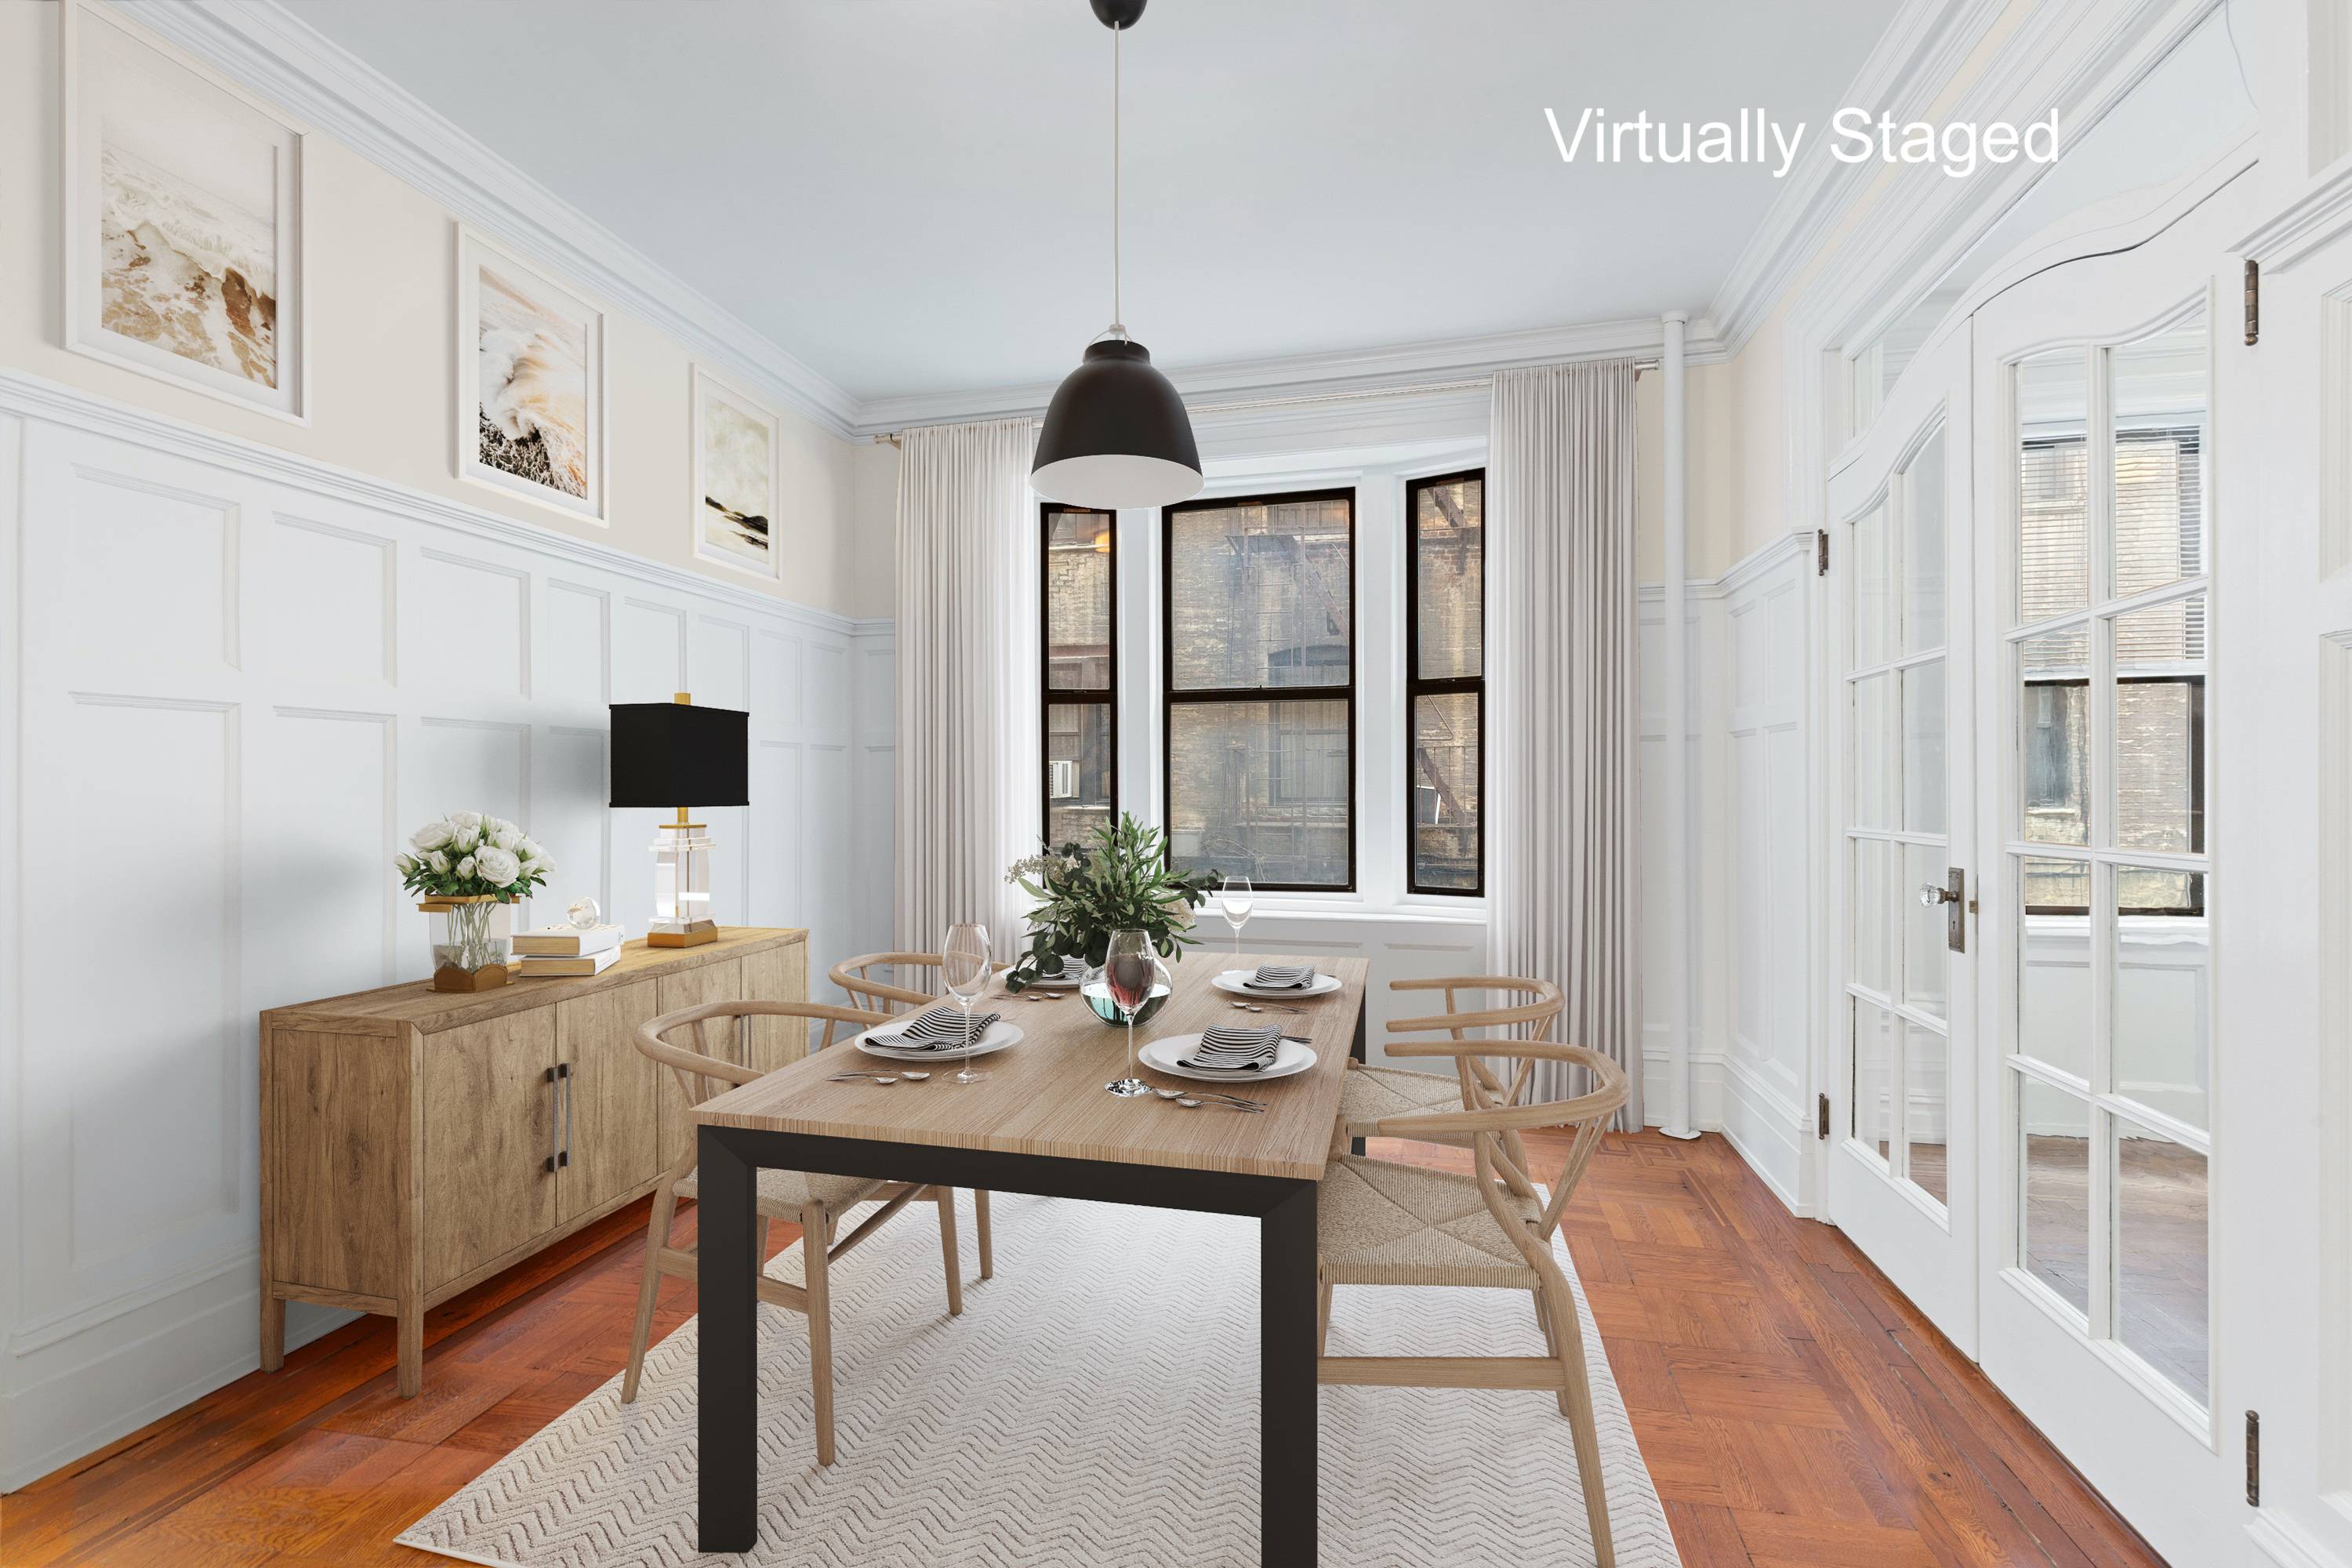 MINT FLEX 2 BEDROOM IN HUDSON HEIGHTS Preserved and restored details from the early 1900 s anchor this 4 room convertible 2 bedroom home with beauty and grandeur.